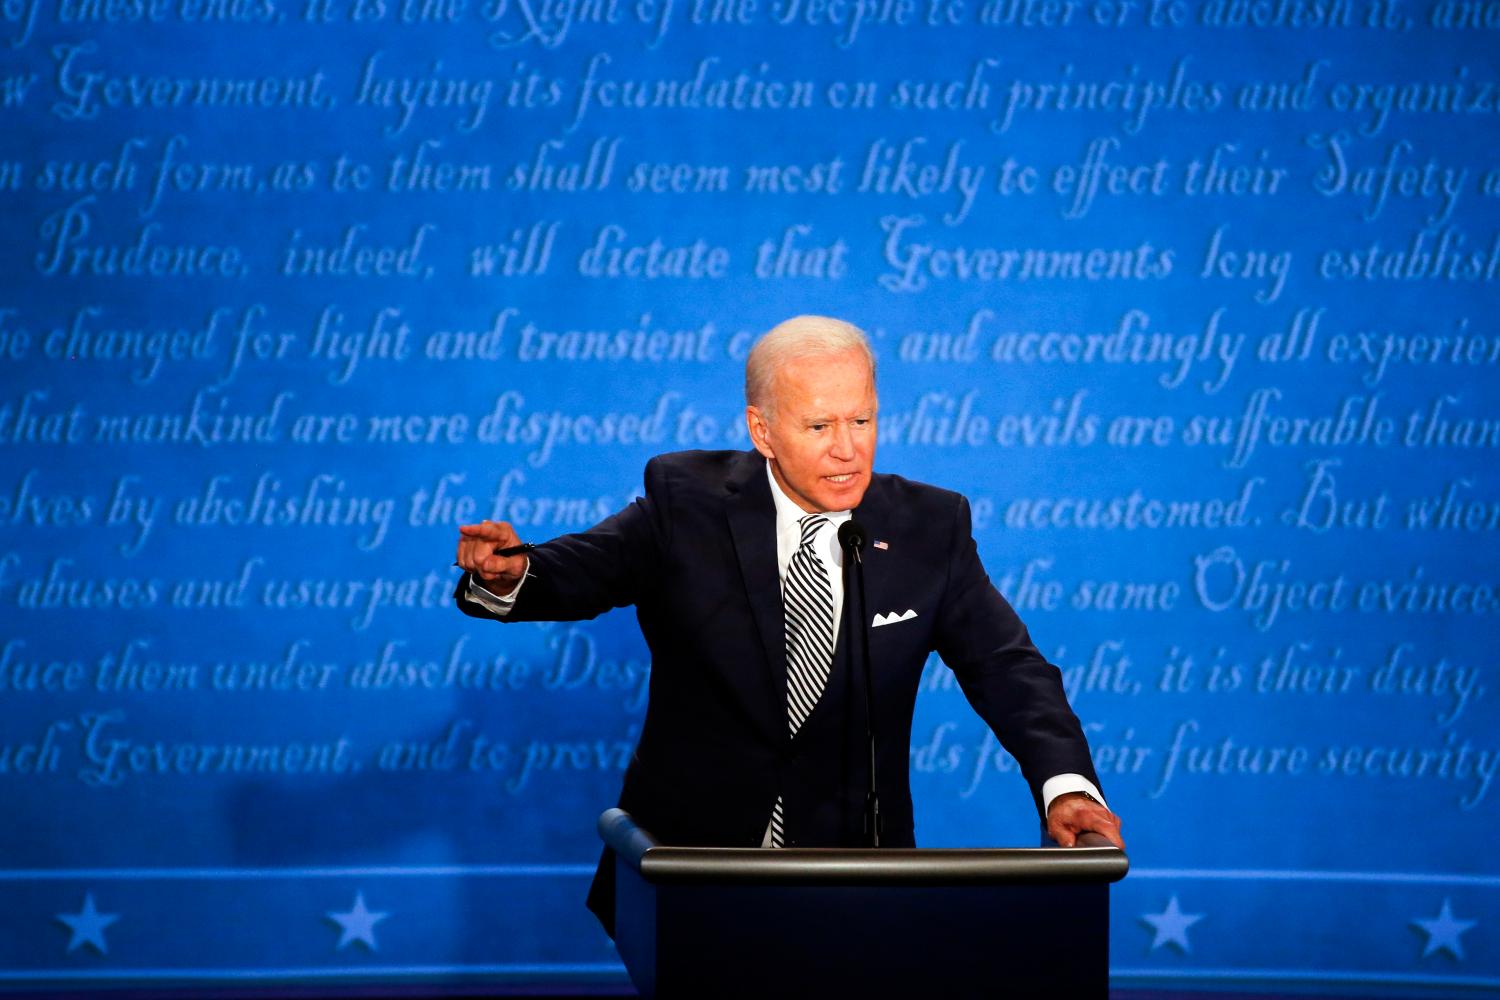 Sep 29, 2020; Cleveland, OH, USA; Democratic presidential candidate, former Vice President Joe Biden debates President Donald Trump in the first Presidential debate in the Sheila and Eric Samson Pavilion at the Cleveland Clinic, Tuesday, Sept. 29, 2020, in Cleveland. Mandatory Credit: Meg Vogel/Cincinnati Enquirer via USA TODAY NETWORK